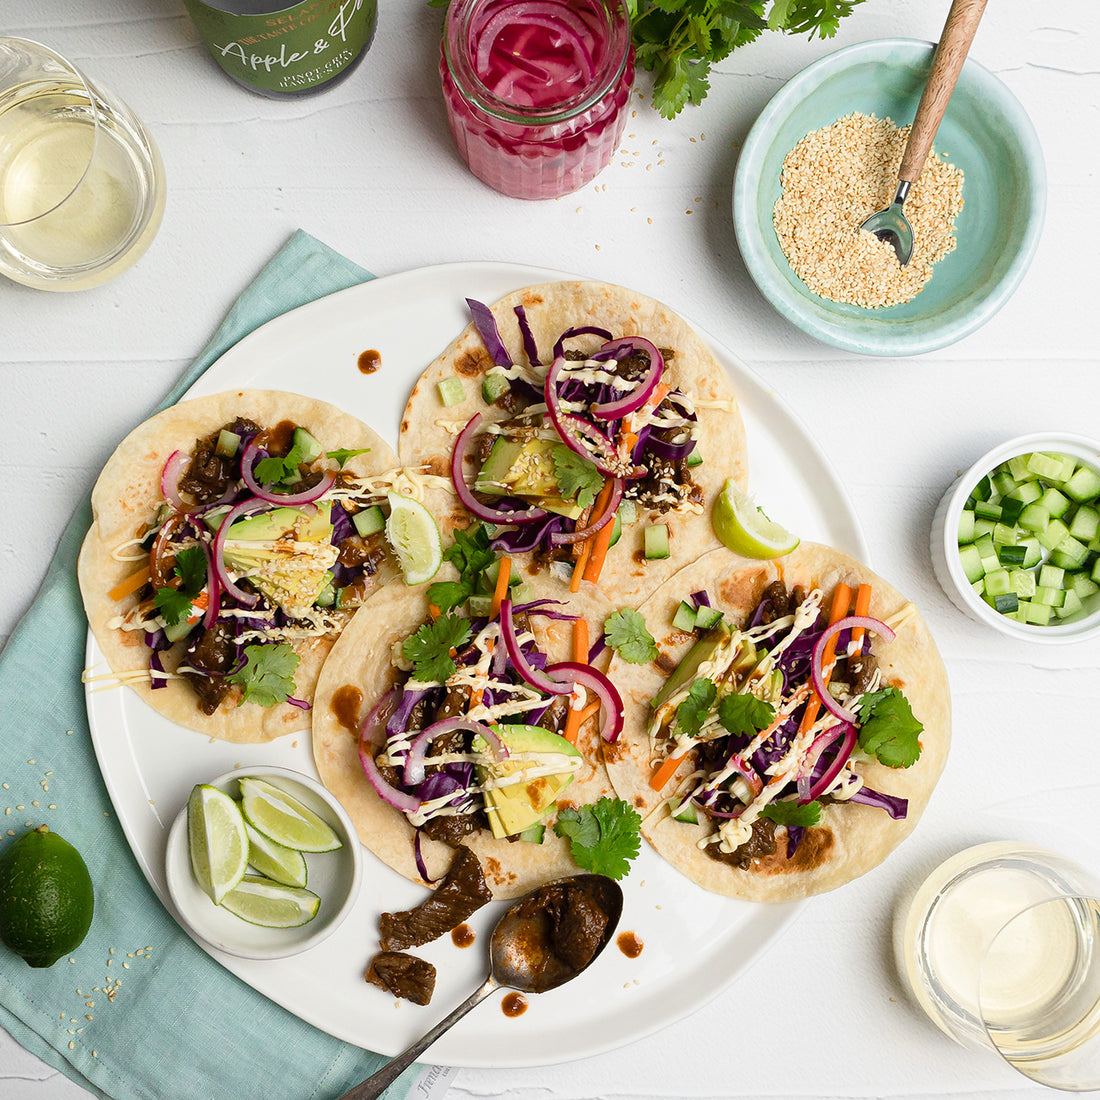 Bulgogi beef tacos Paired Perfectly with Selaks The Taste Collection Apple & Pear Pinot Gris